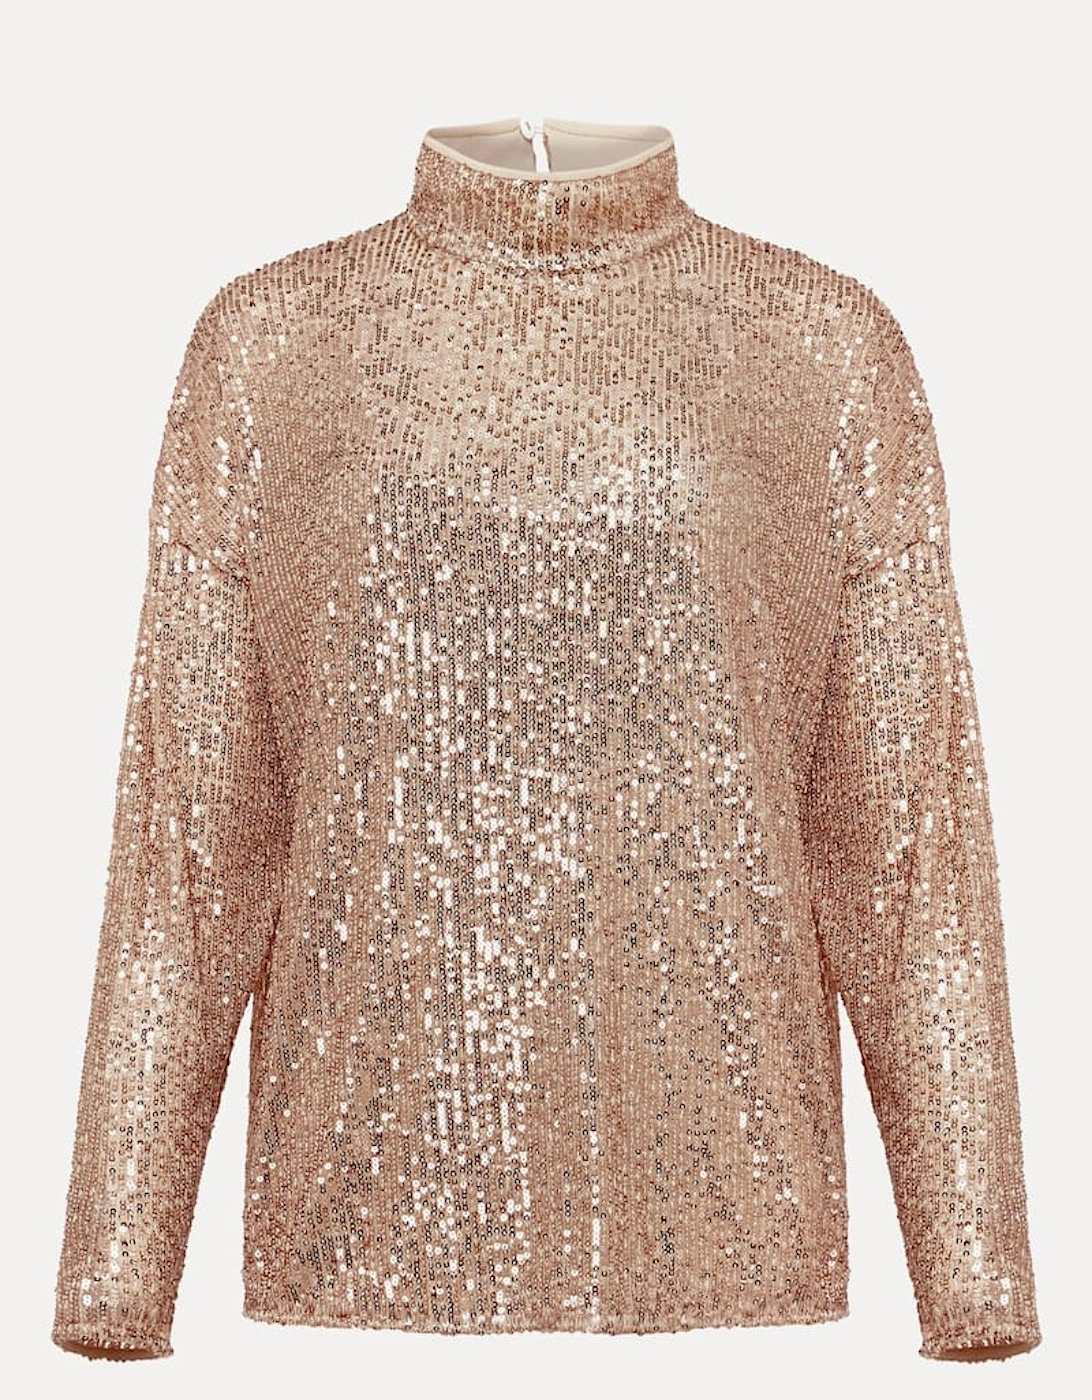 Dhara Sequin Blouse